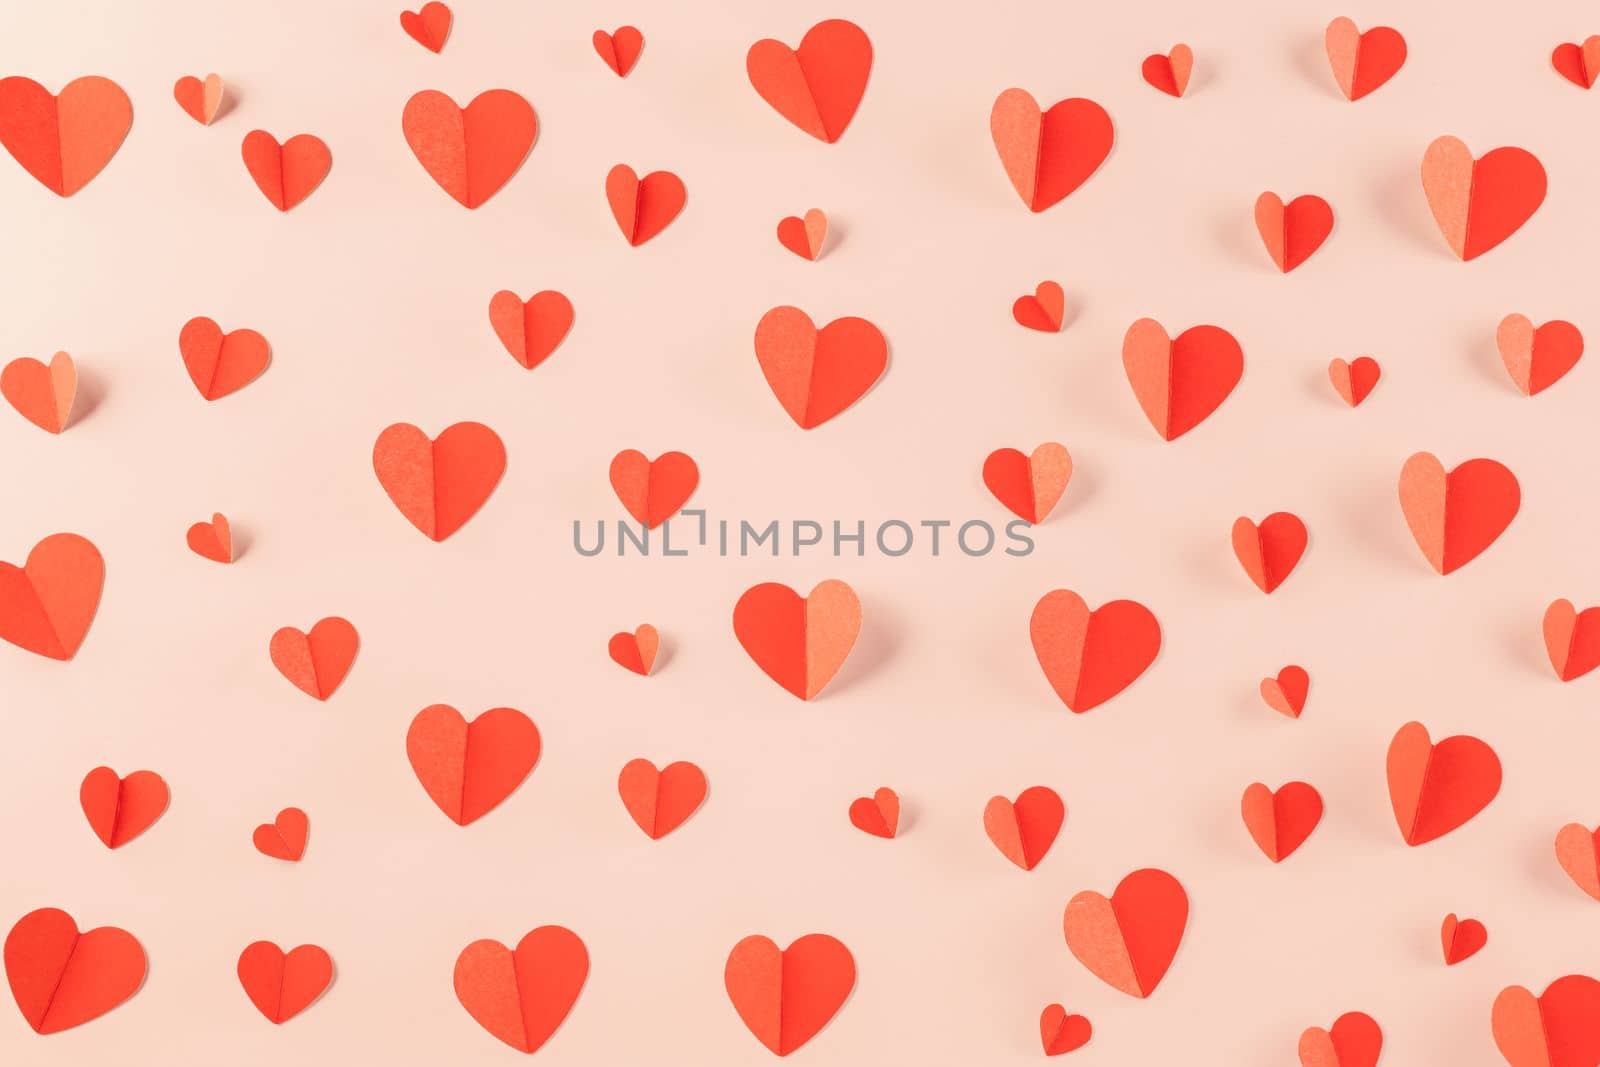 Beautiful red paper hearts shape cutting pastel pink background by Sorapop